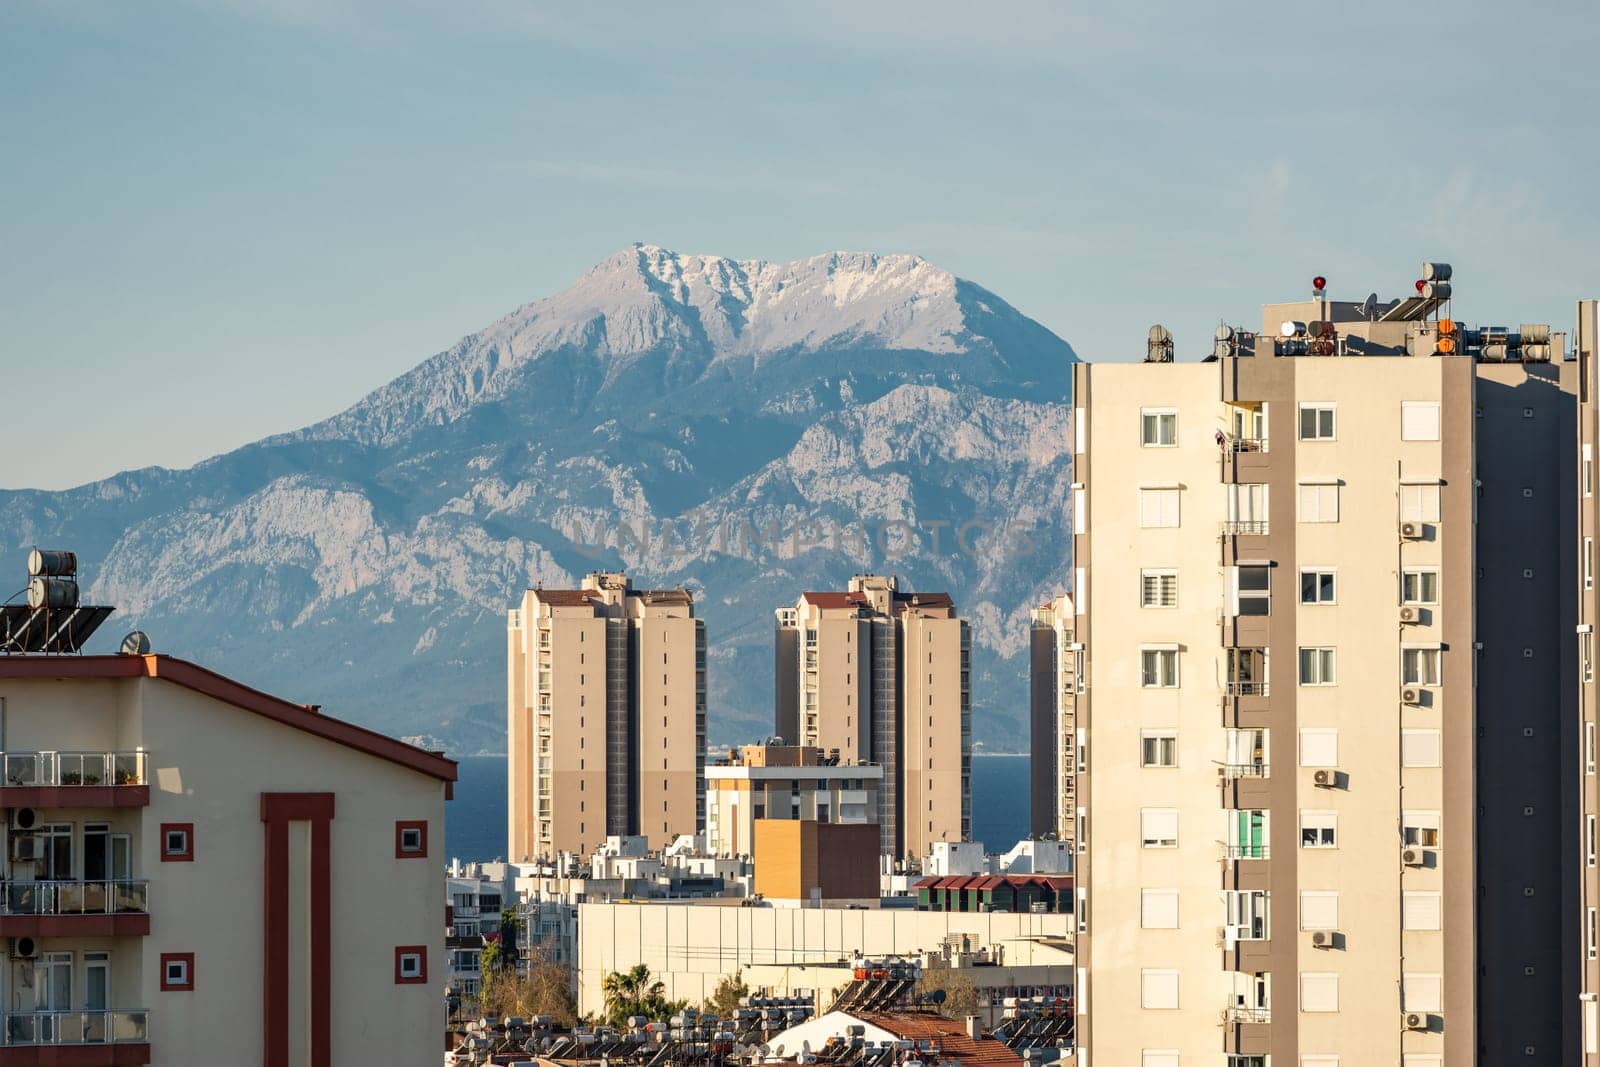 Snowy mountain peak visible through city buildings on a sunny day by Sonat